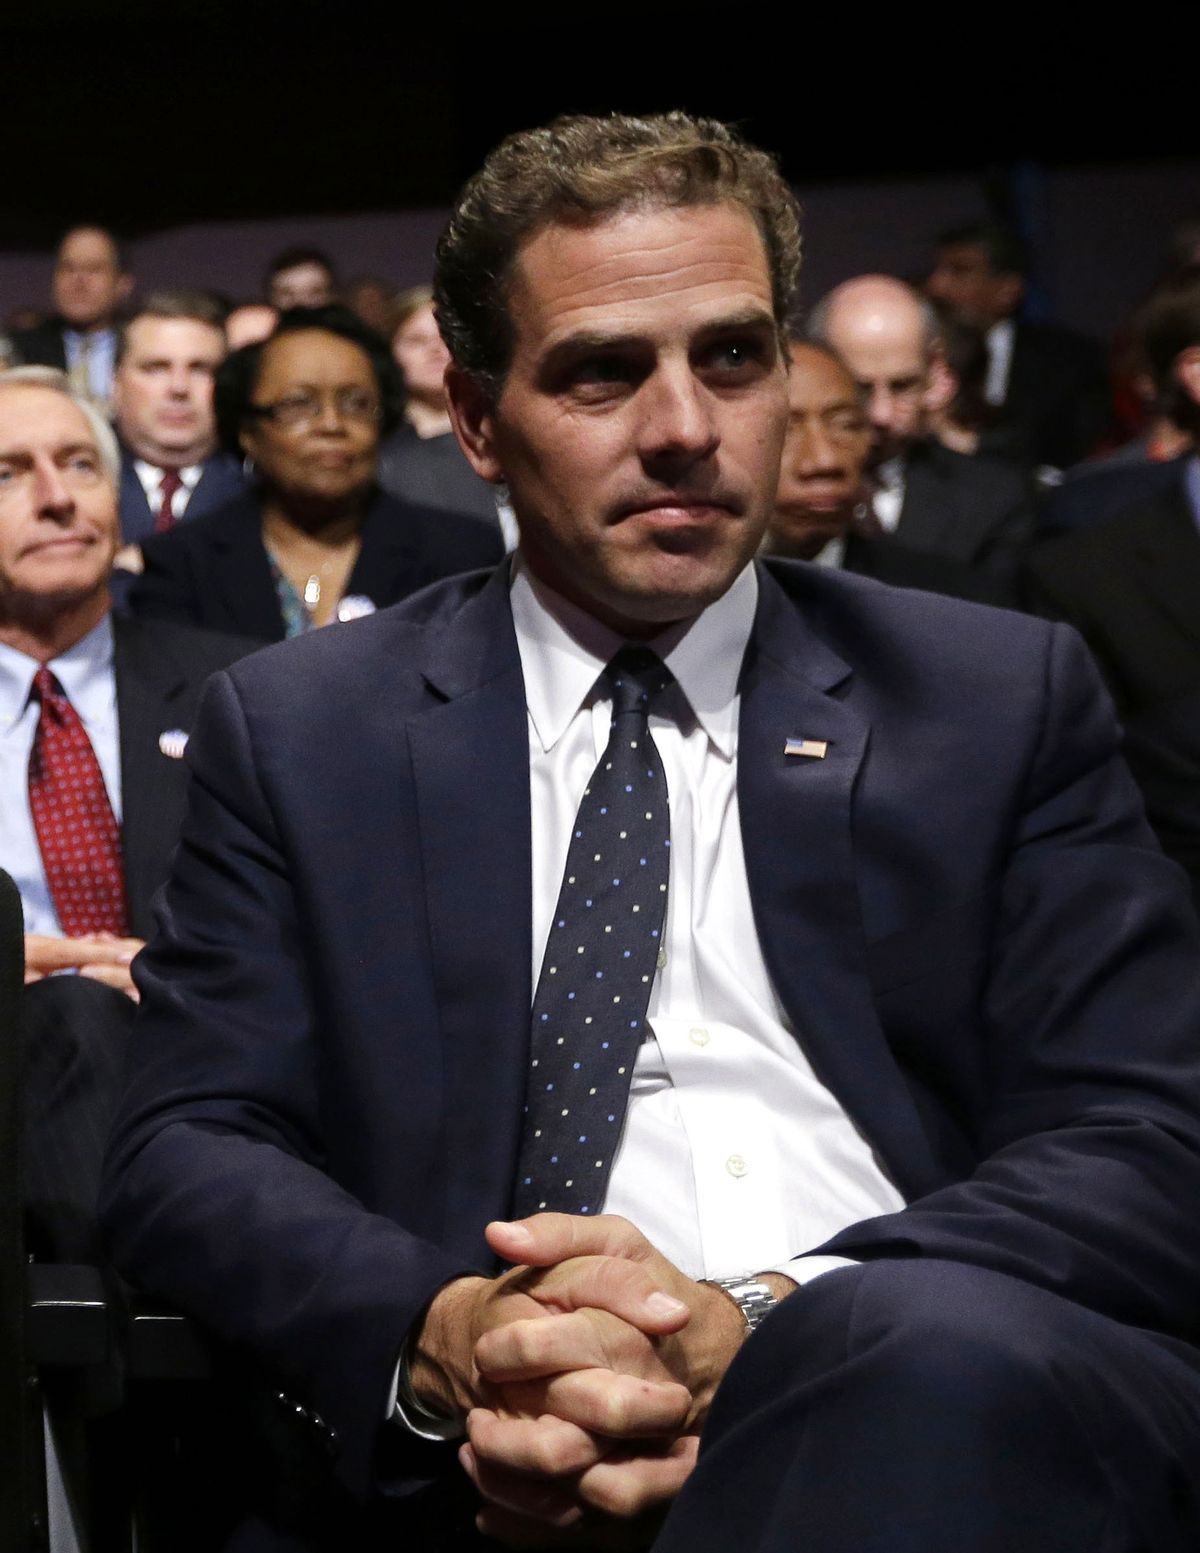 In this Oct. 11, 2012, file photo Hunter Biden waits for the start of the his father's, Vice President Joe Biden's, debate at Centre College in Danville, Ky. In 2014, Hunter Biden was hired by a private Ukrainian company that promotes energy independence from Russia. (AP Photo/Pablo Martinez Monsivais, File) (AP)